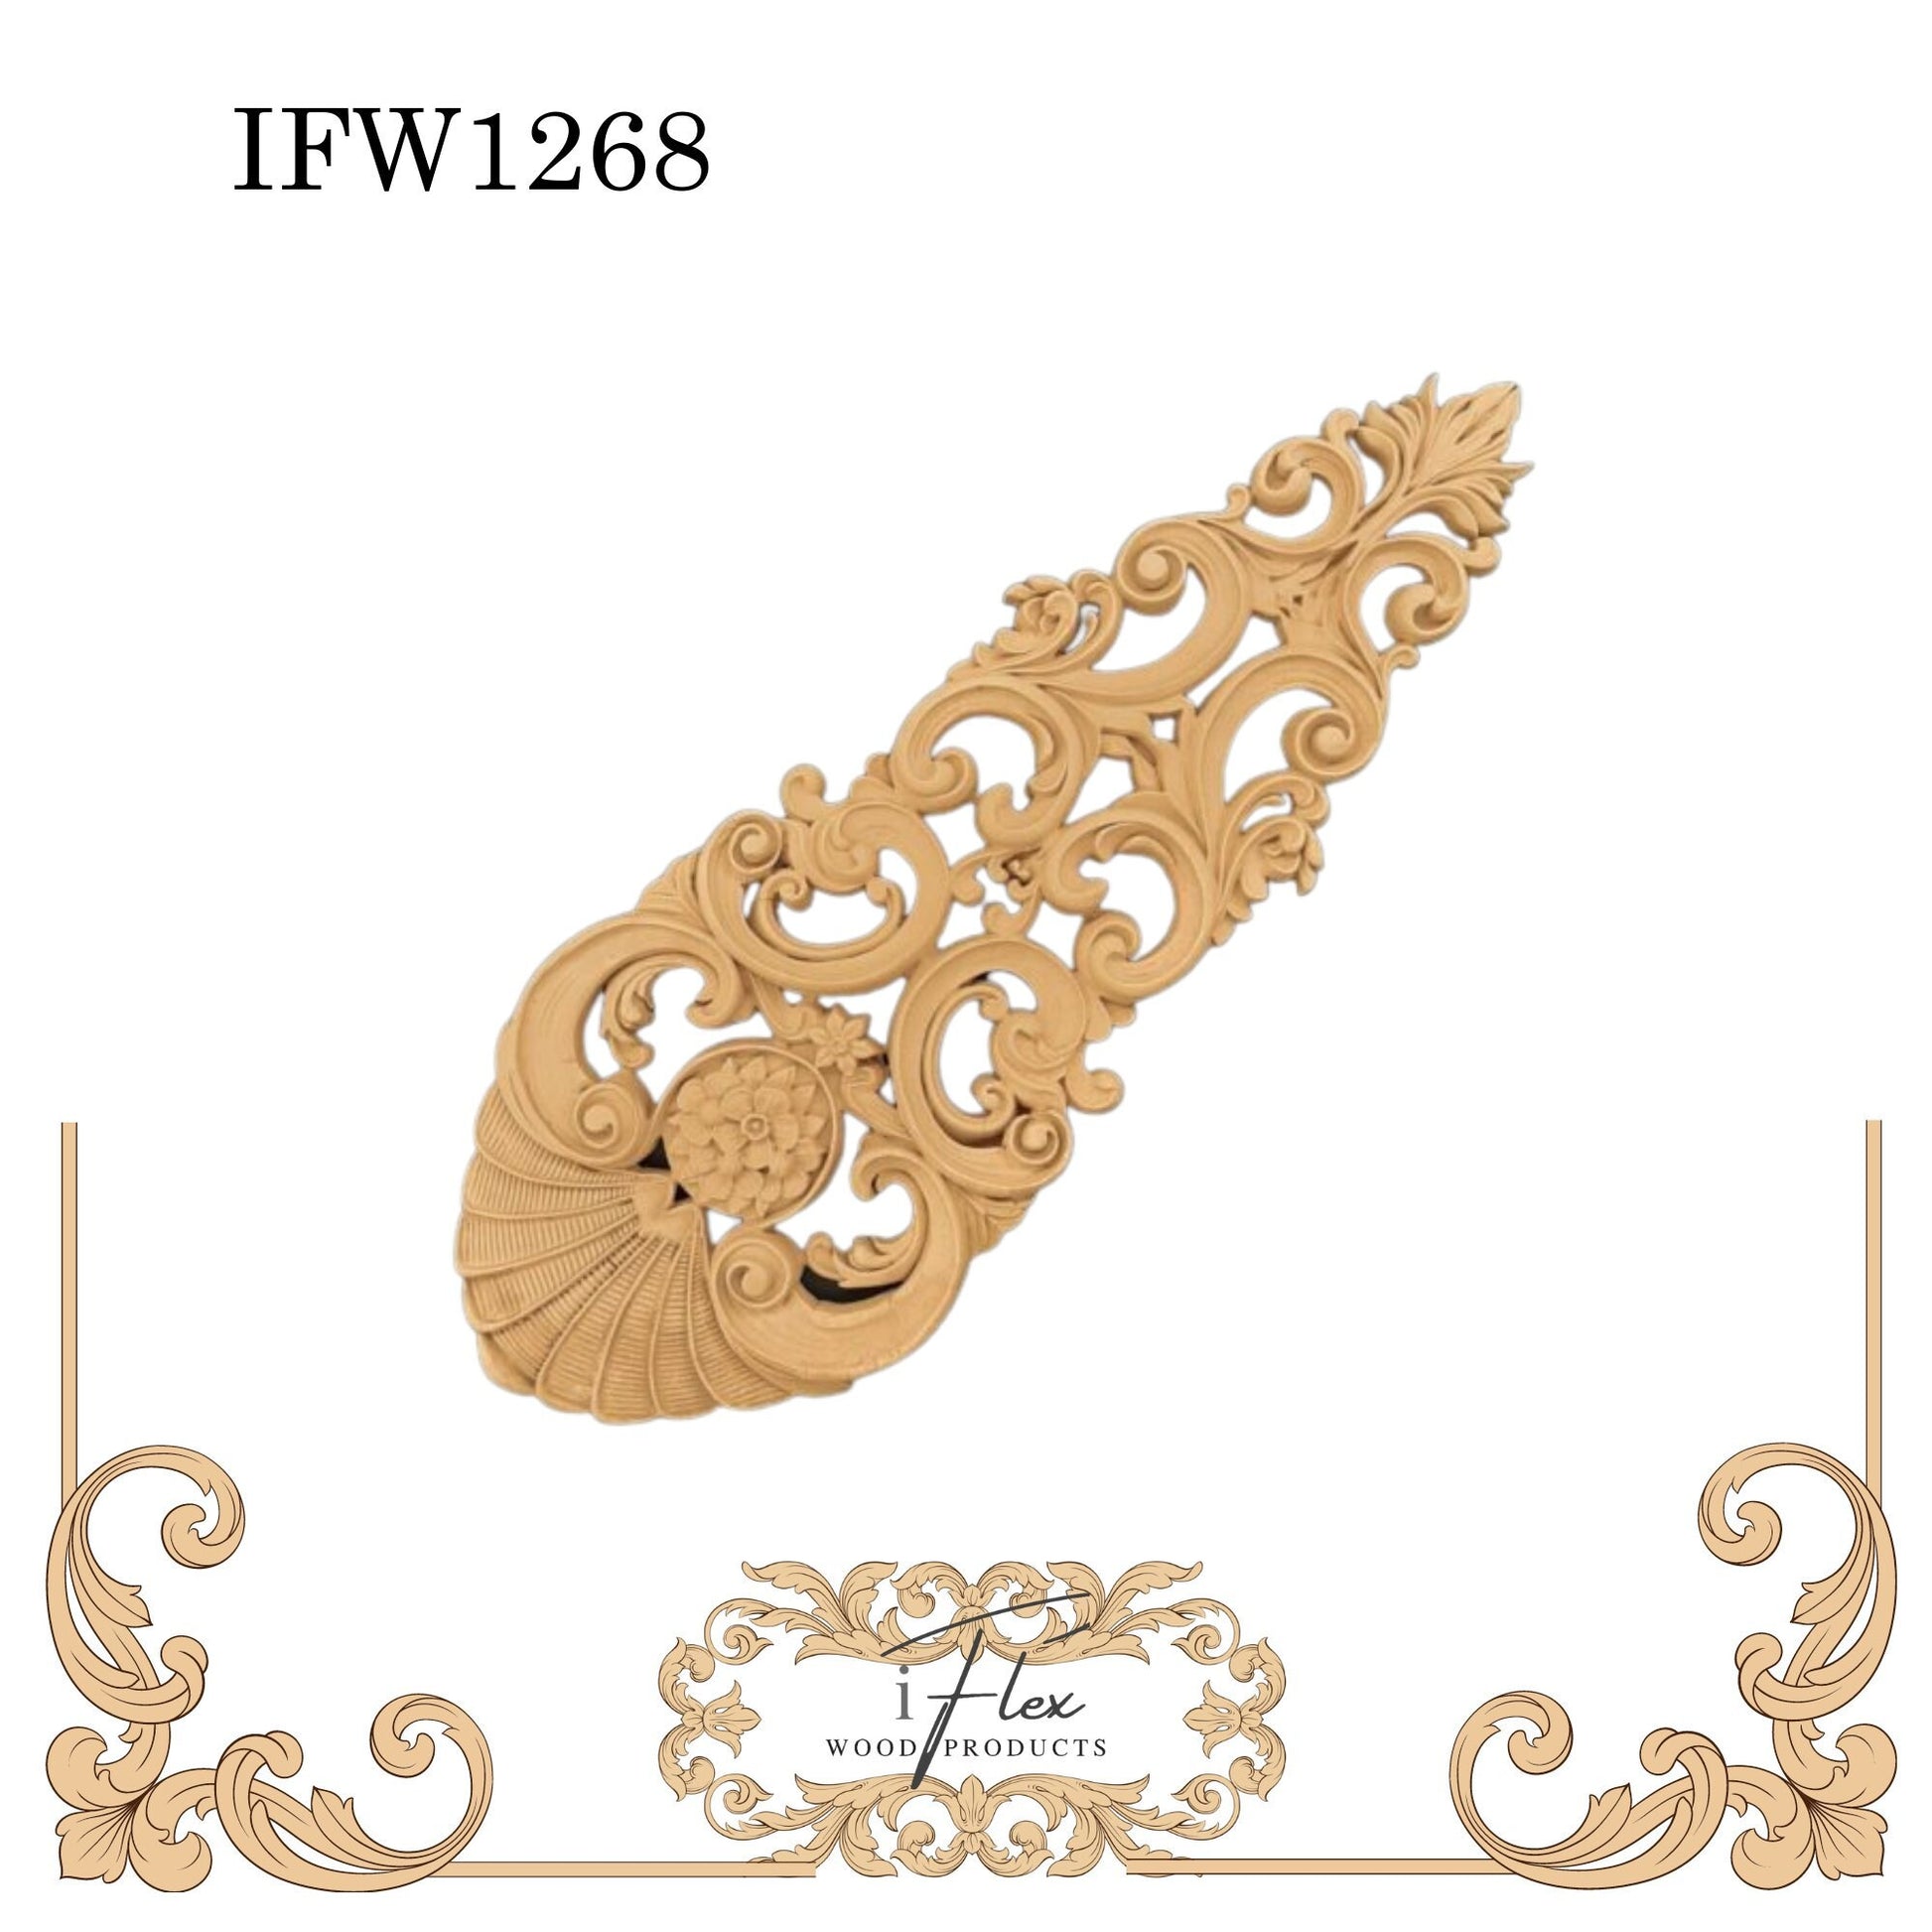 IFW 1268 iFlex Wood Products, bendable mouldings, flexible, wooden appliques, drop, architectural piece